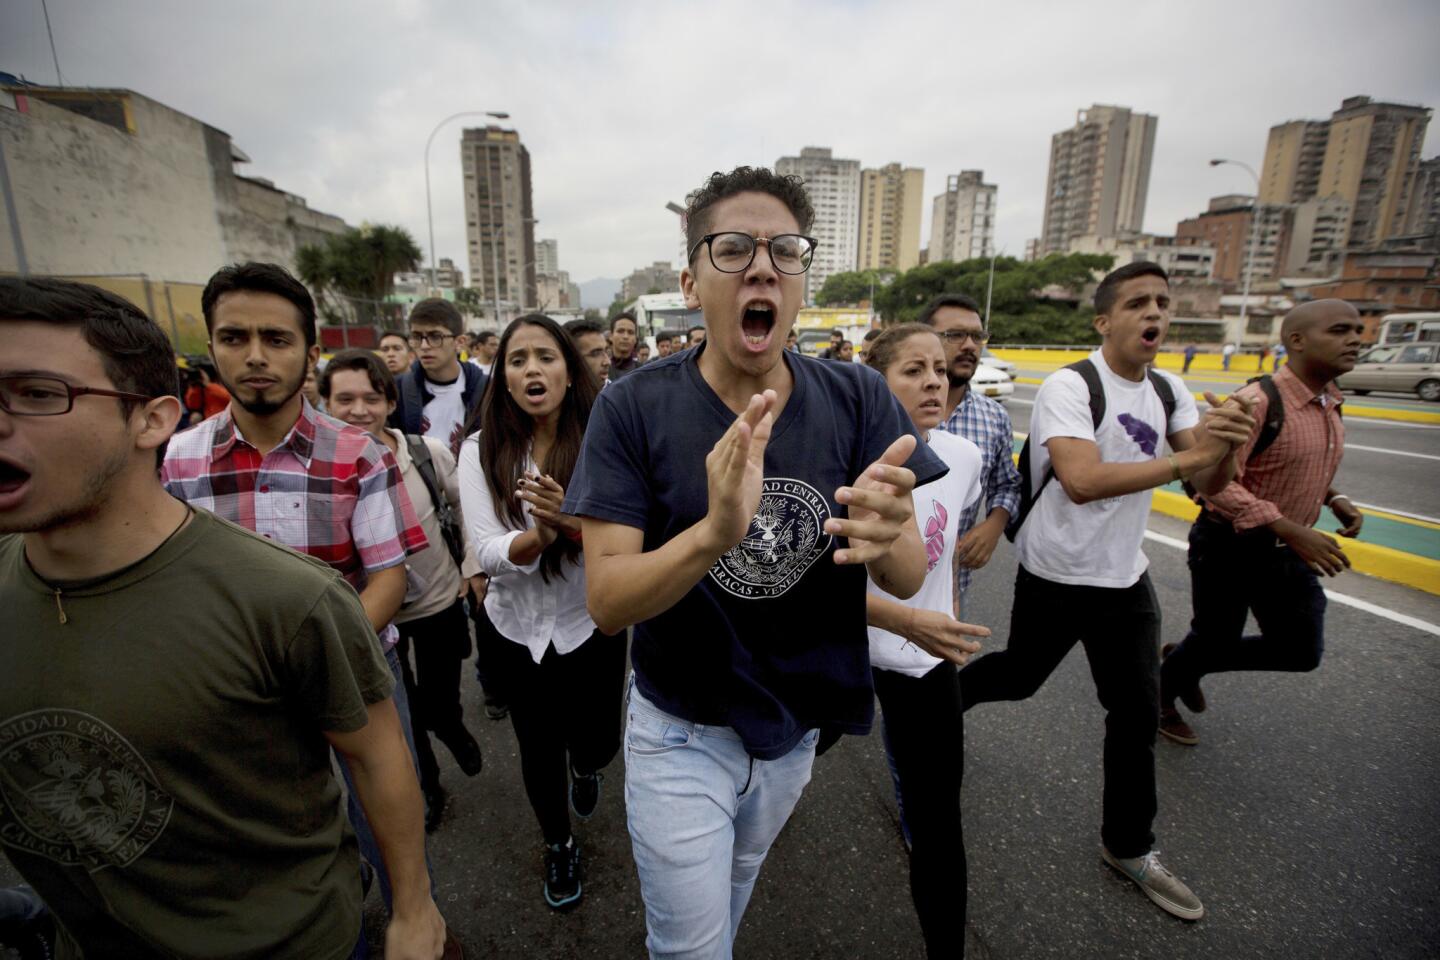 University students shout, "No dictatorship," during a protest outside the Supreme Court in Caracas, Venezuela. Venezuelans have been thrust into a new round of political turbulence after the government-stacked Supreme Court gutted congress of its last vestiges of power, drawing widespread condemnation from foreign governments and sparking protests in the capital.